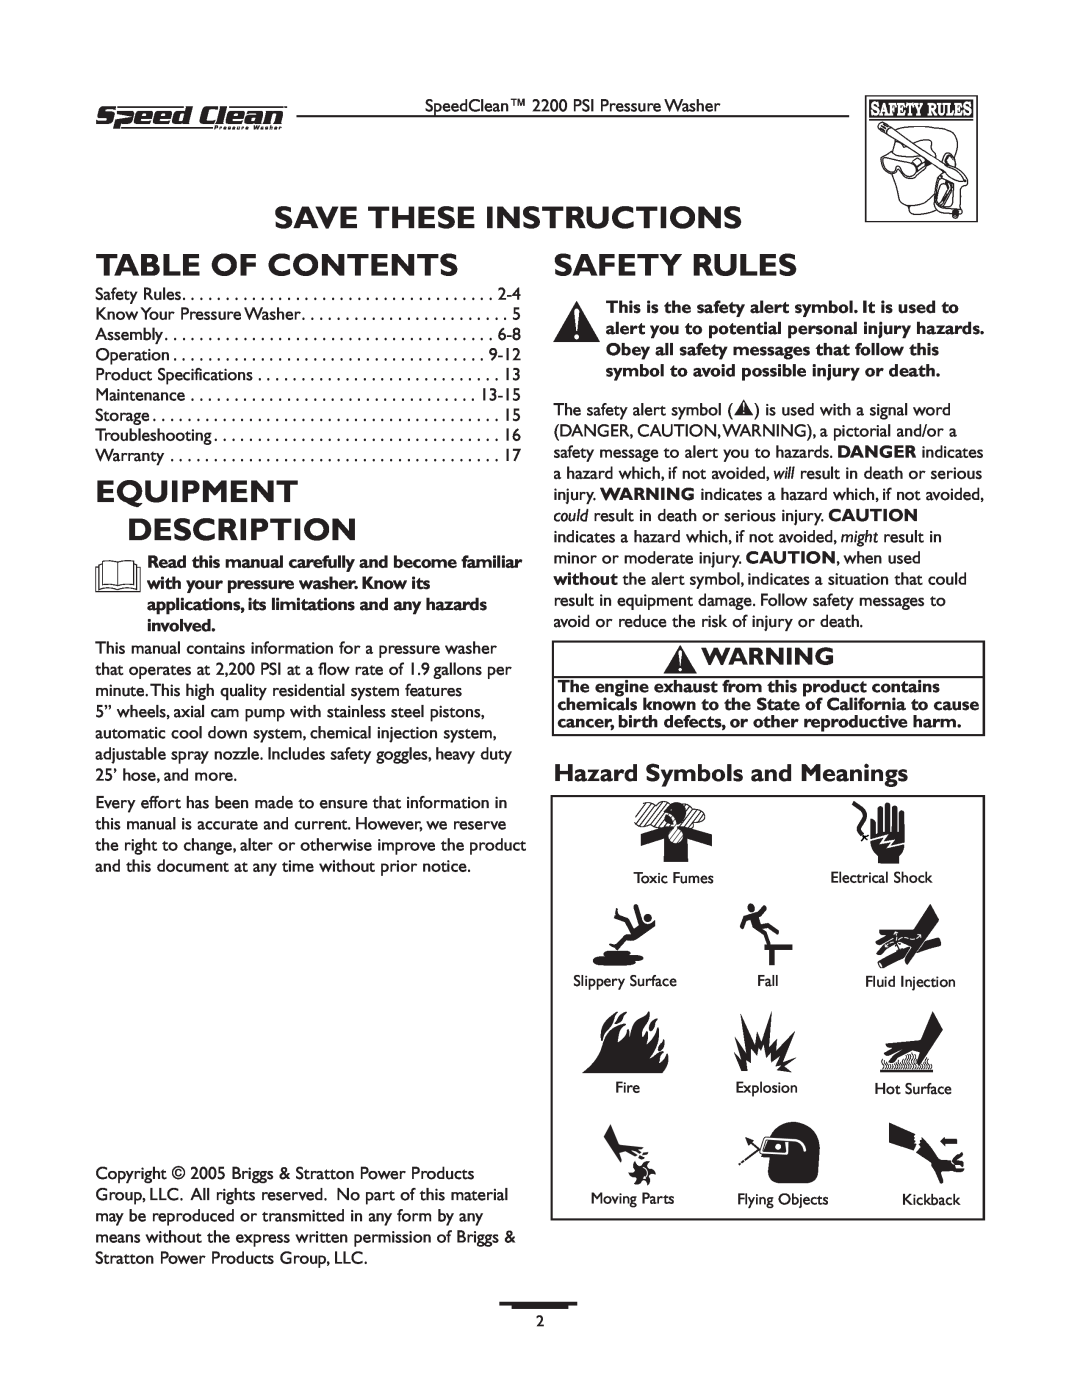 Briggs & Stratton 020239-1 owner manual Save These Instructions, Table Of Contents, Equipment Description, Safety Rules 